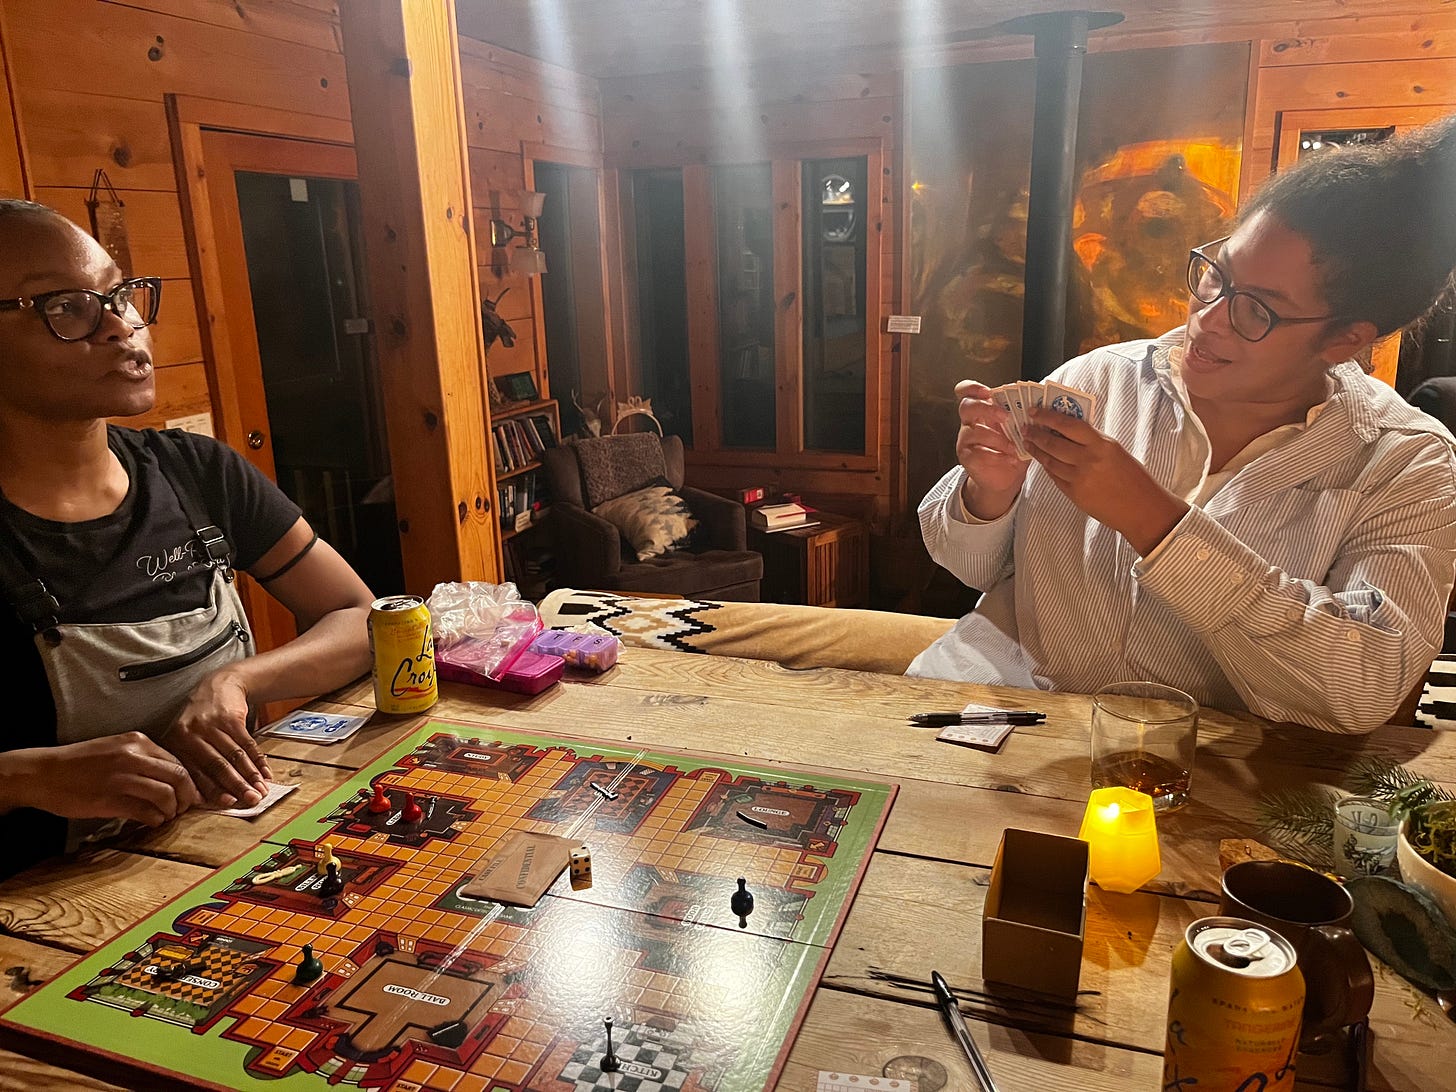 Nafissa and Jackie play Clue on a wooden table inside the wood cabin.